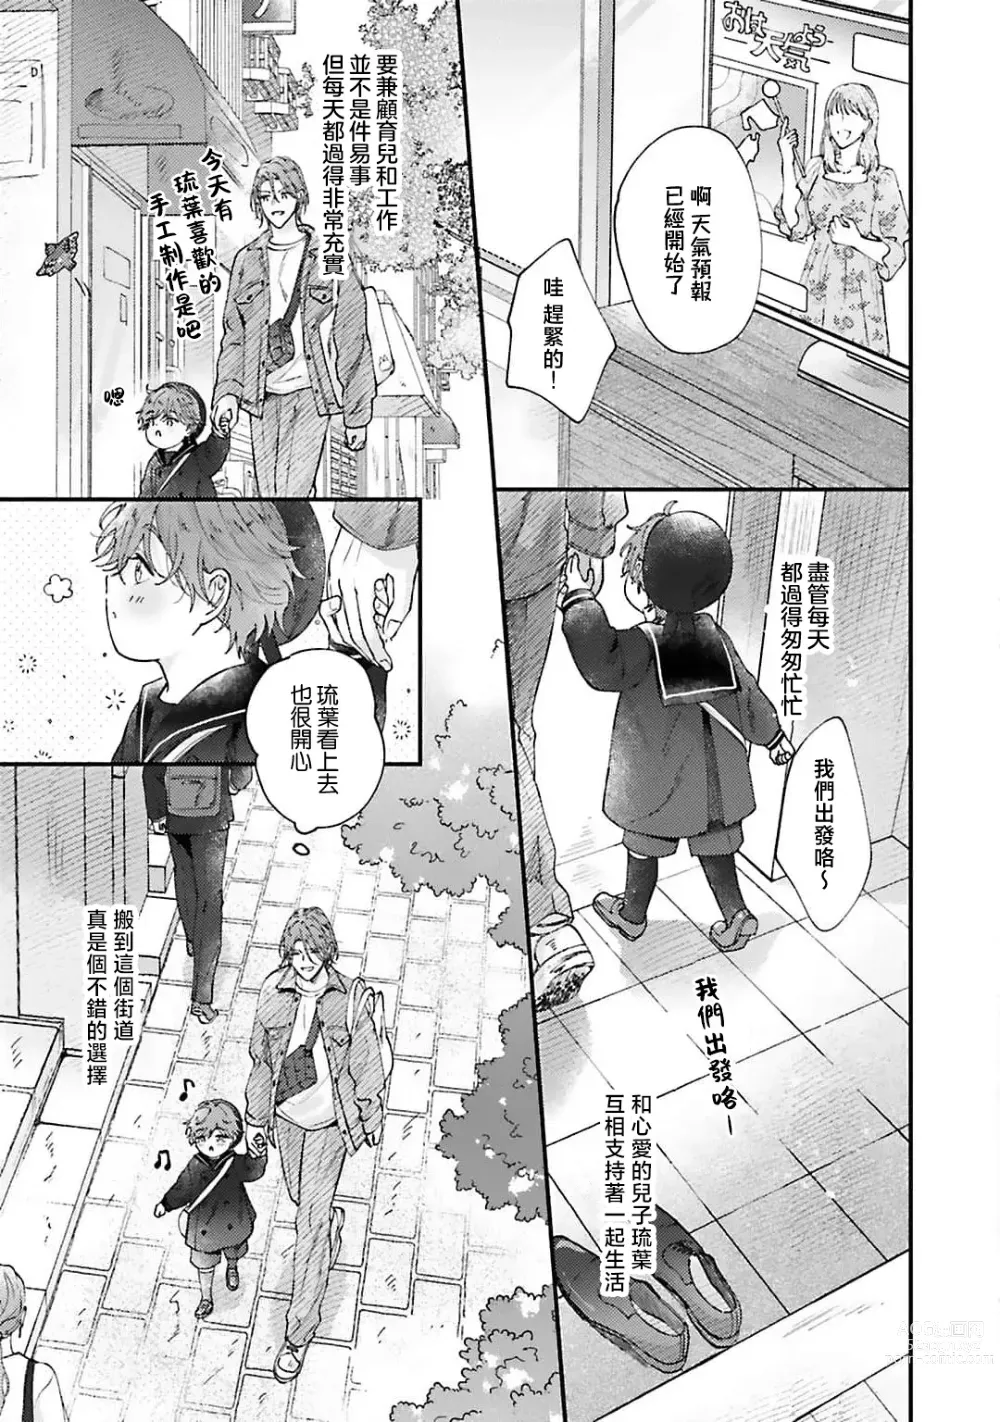 Page 5 of manga 开始当爸爸的两人 another 1